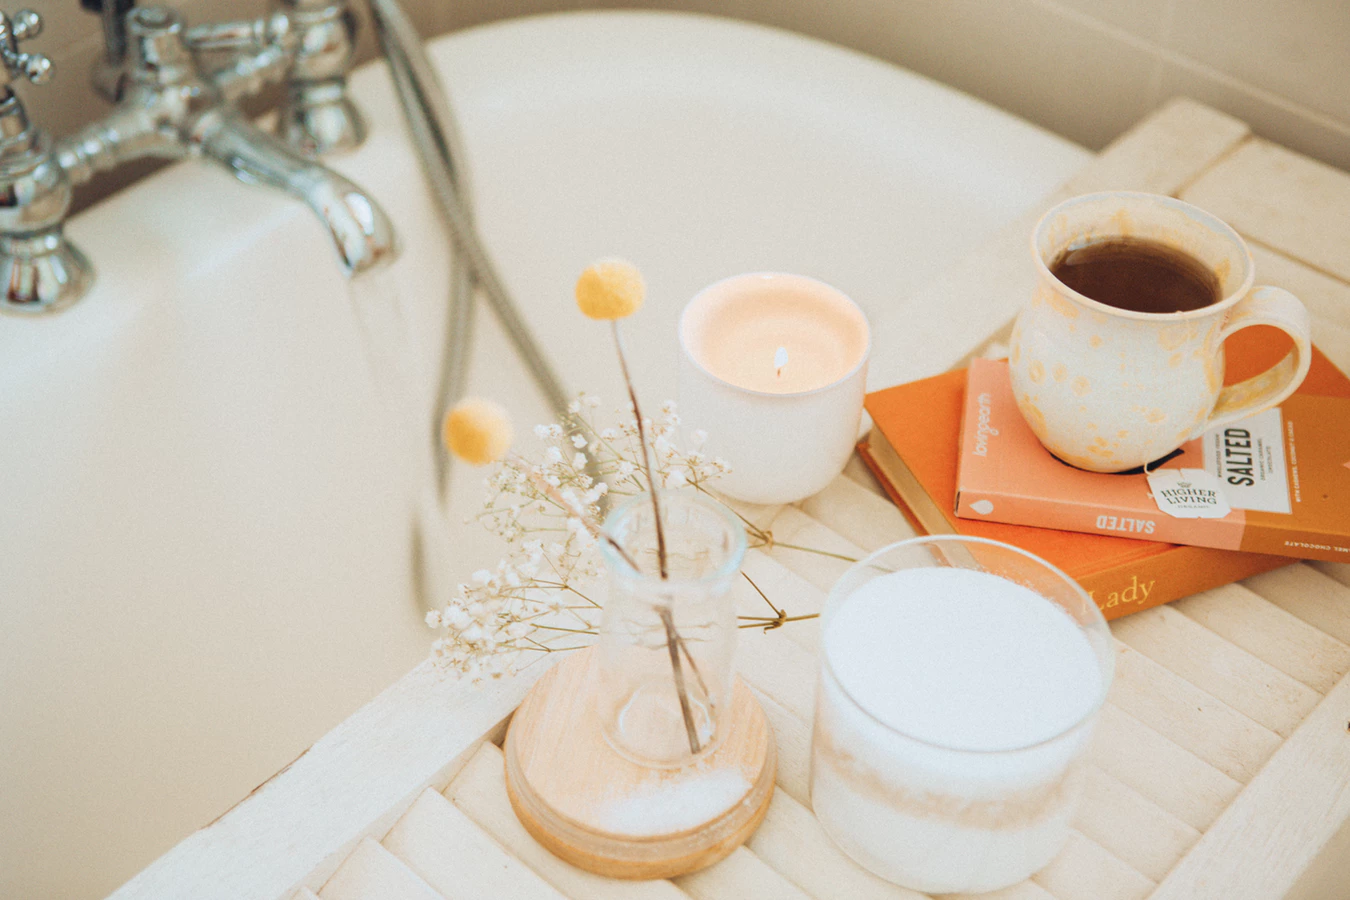 Bath tub with tea, a book, and candles